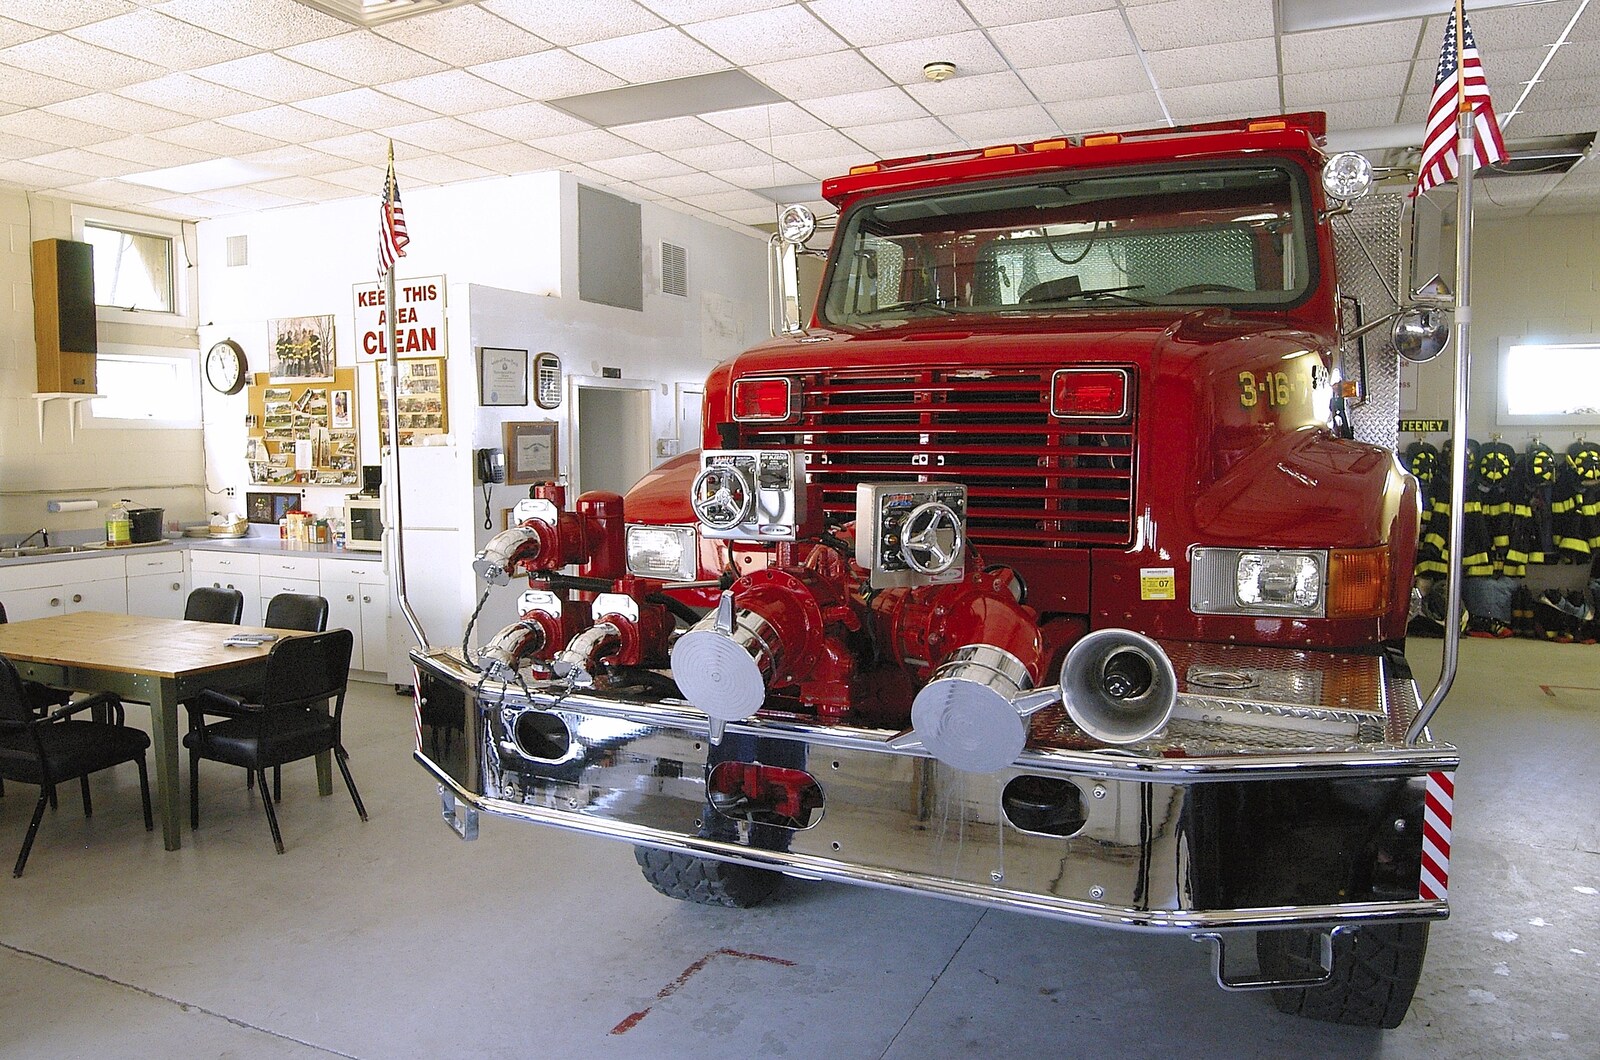 The biggest, shiniest truck in the building from Phil and the Fair Harbor Fire Engine, Fire Island, New York State, US - 30th April 2006